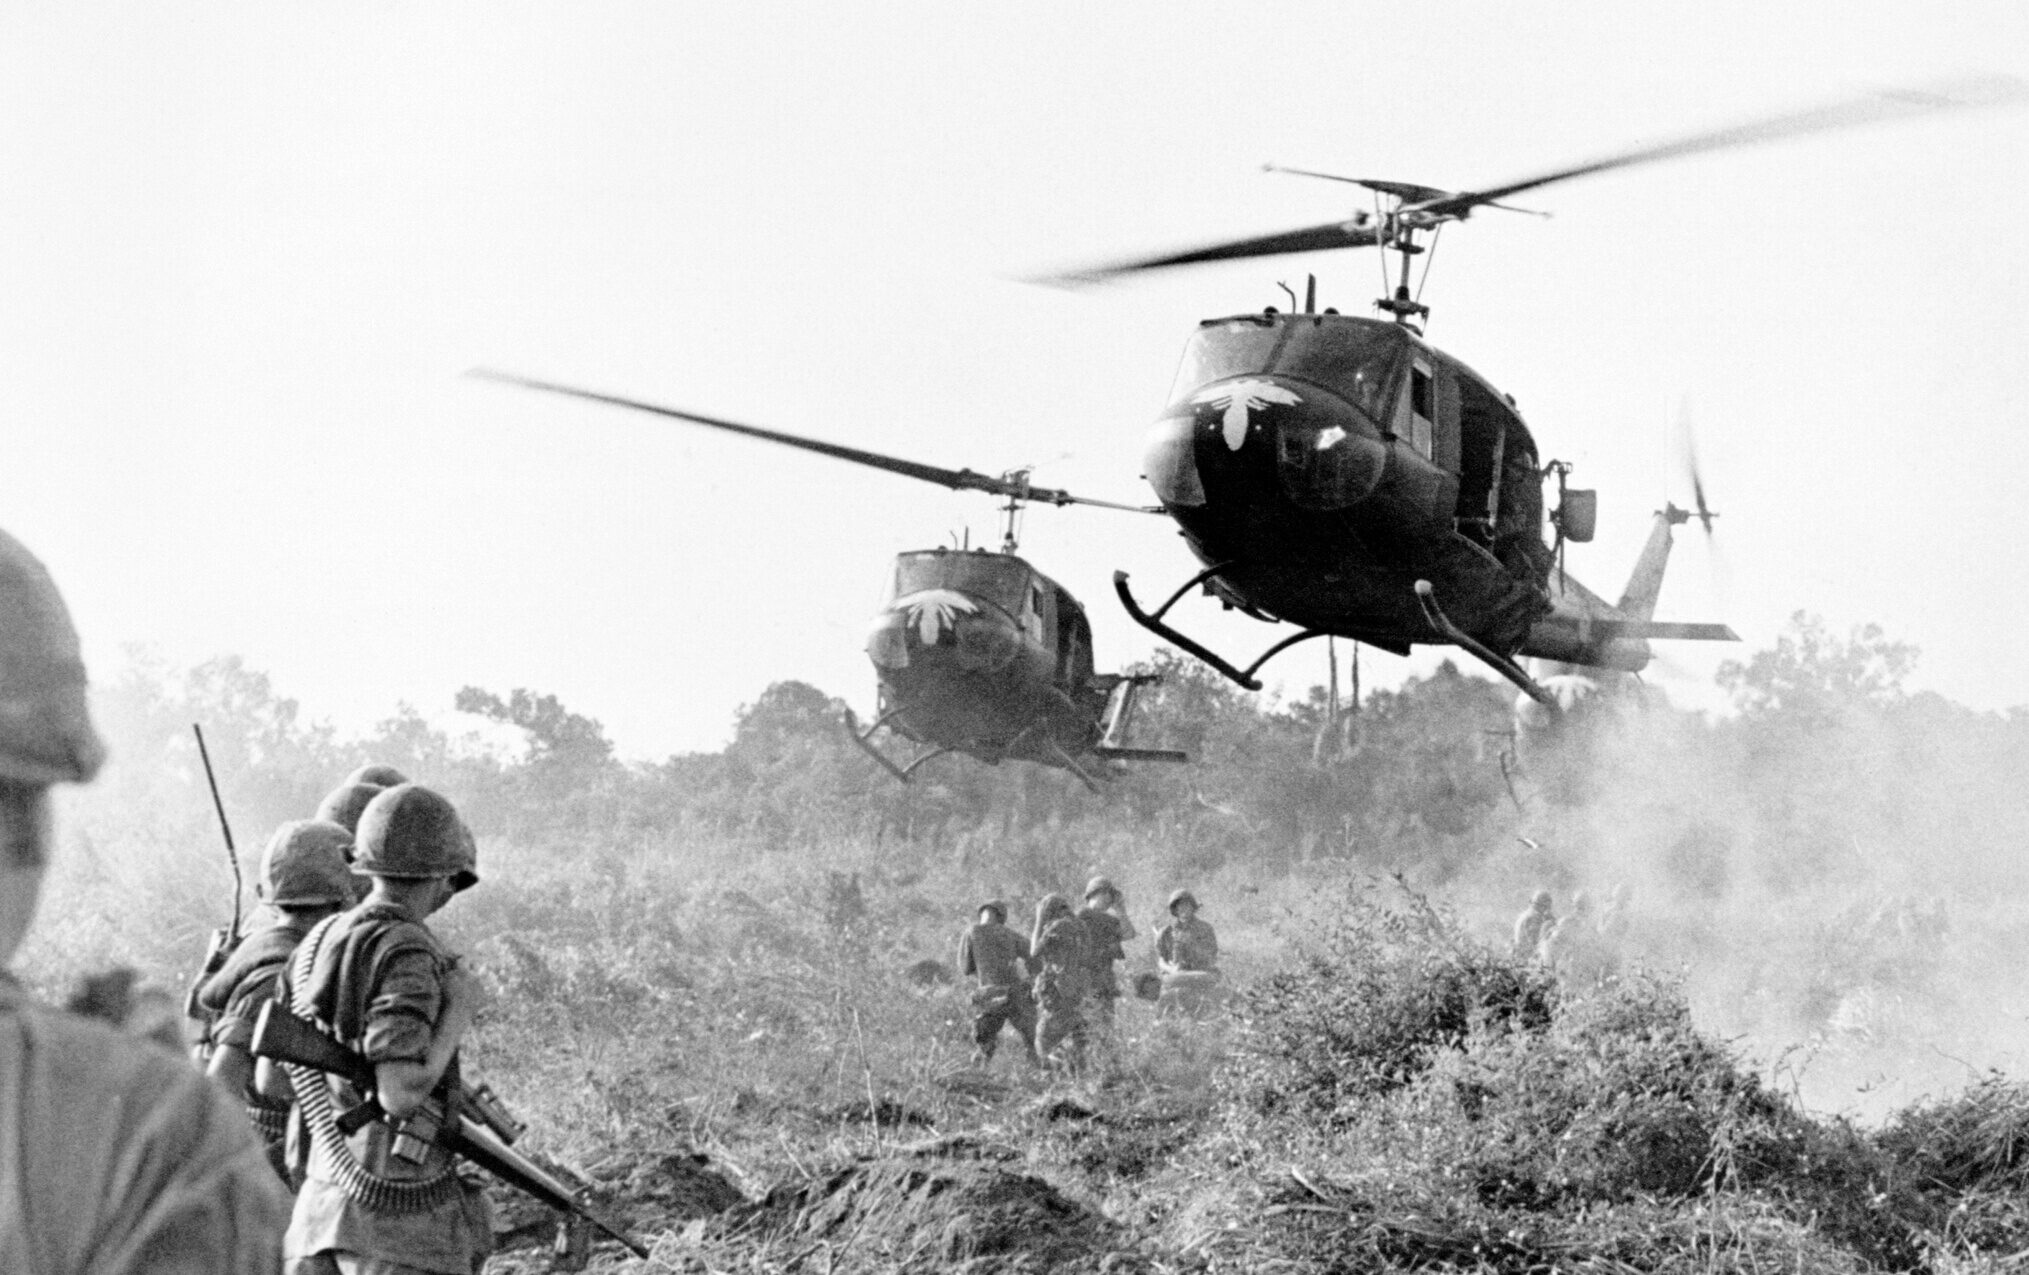 Rescue fliers in Vietnam (Archive Holdings Inc./Getty Images)